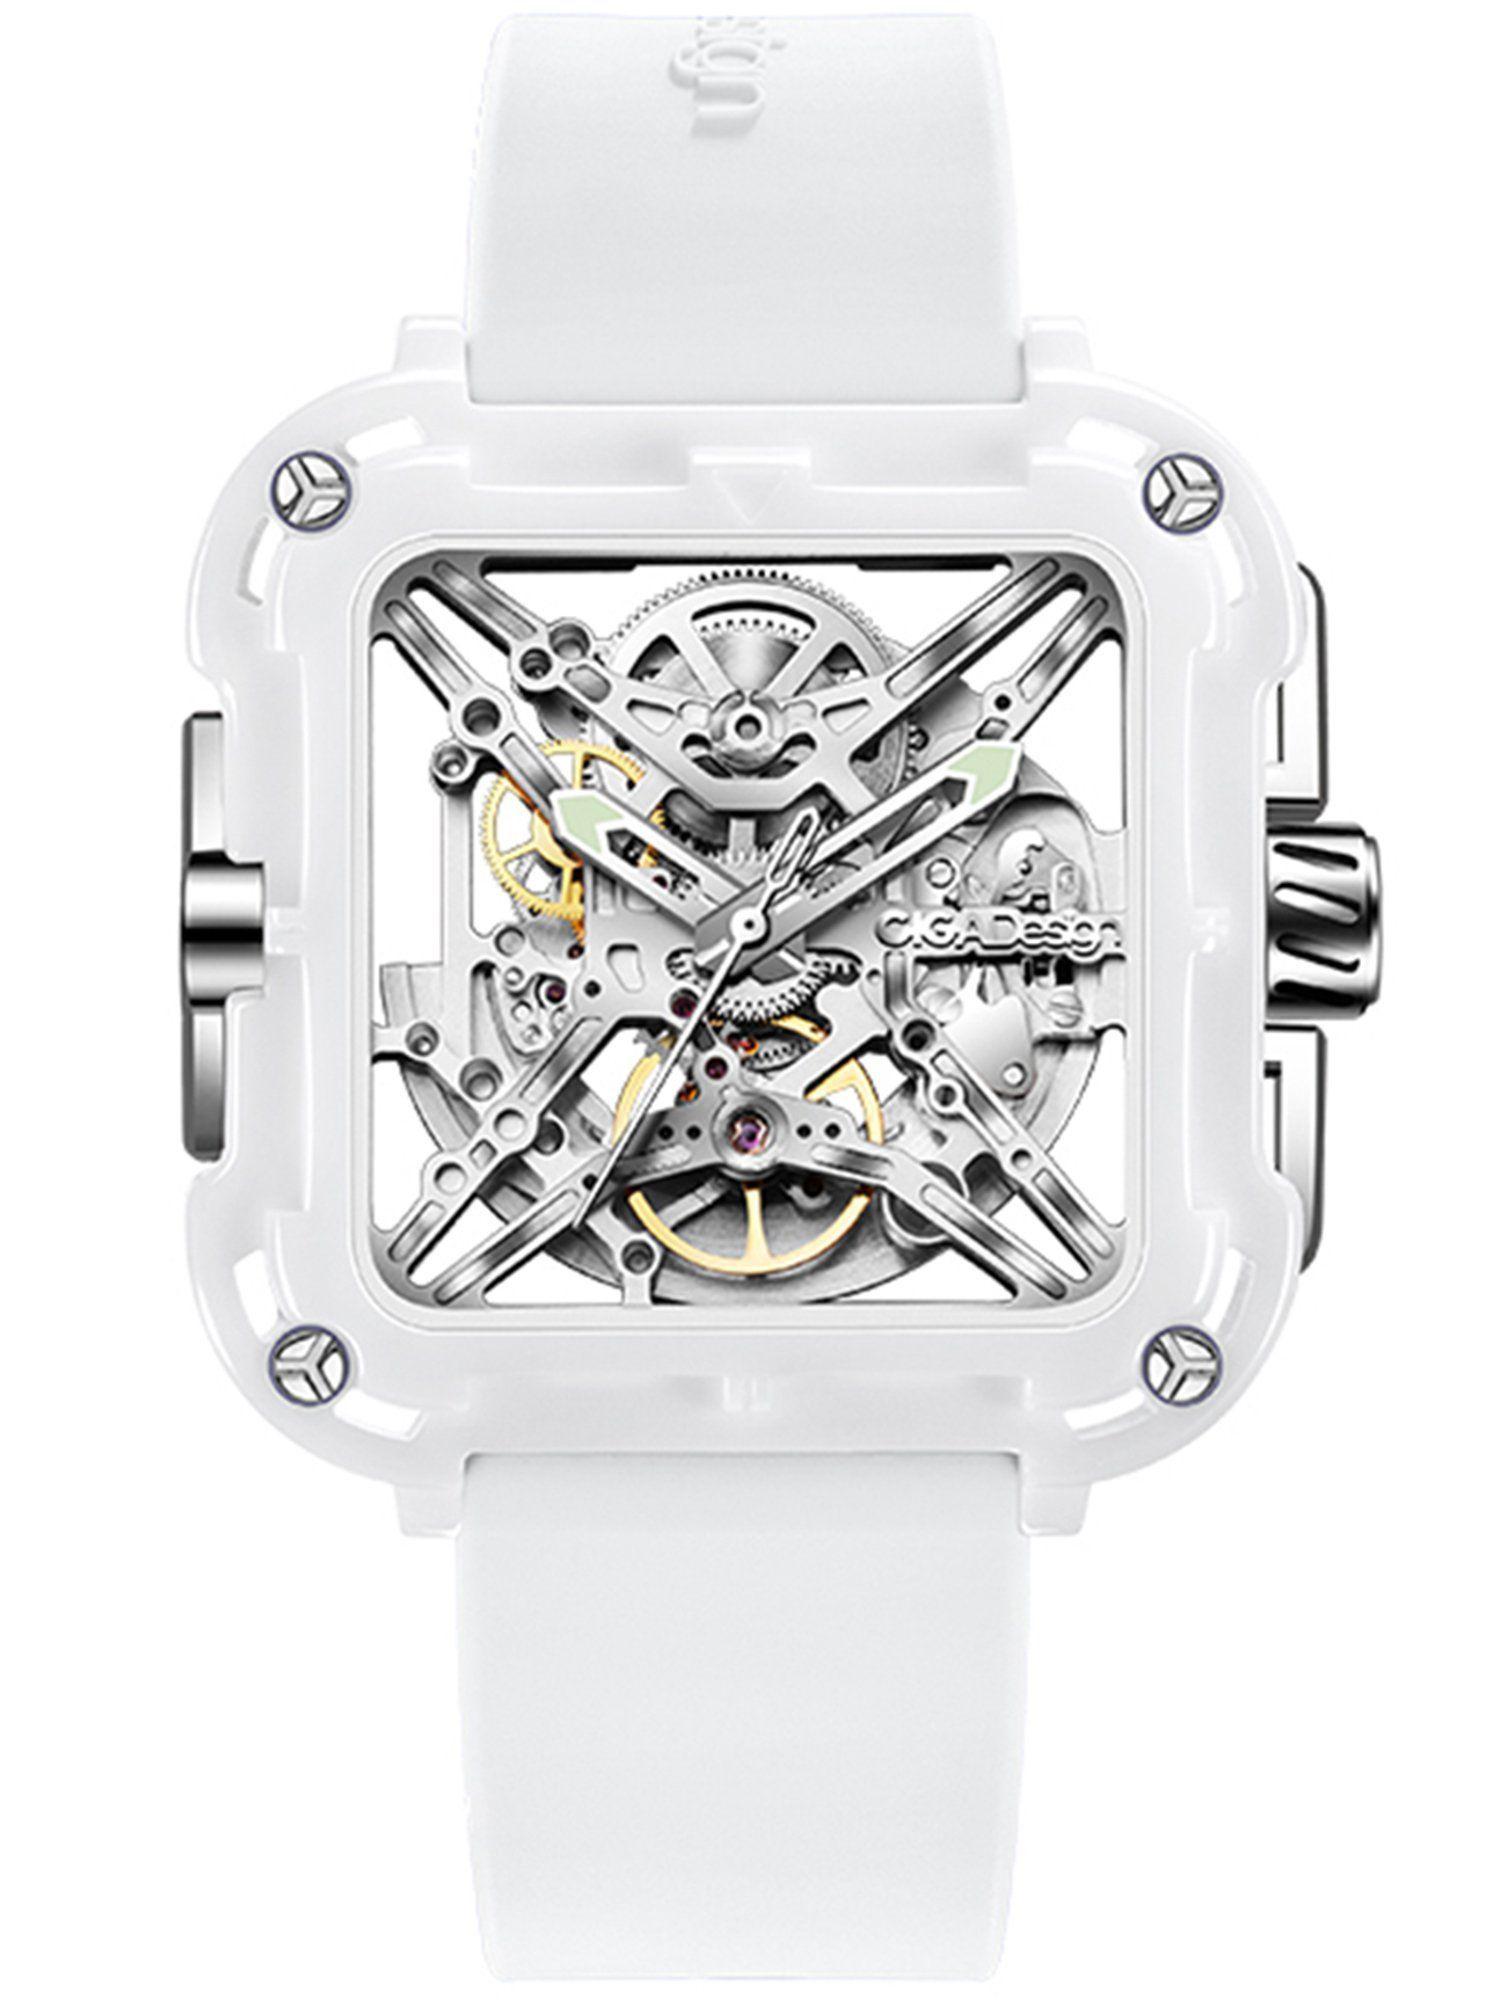 x series suv inspired anti-shock skeleton watches with silicone band & ceramic case